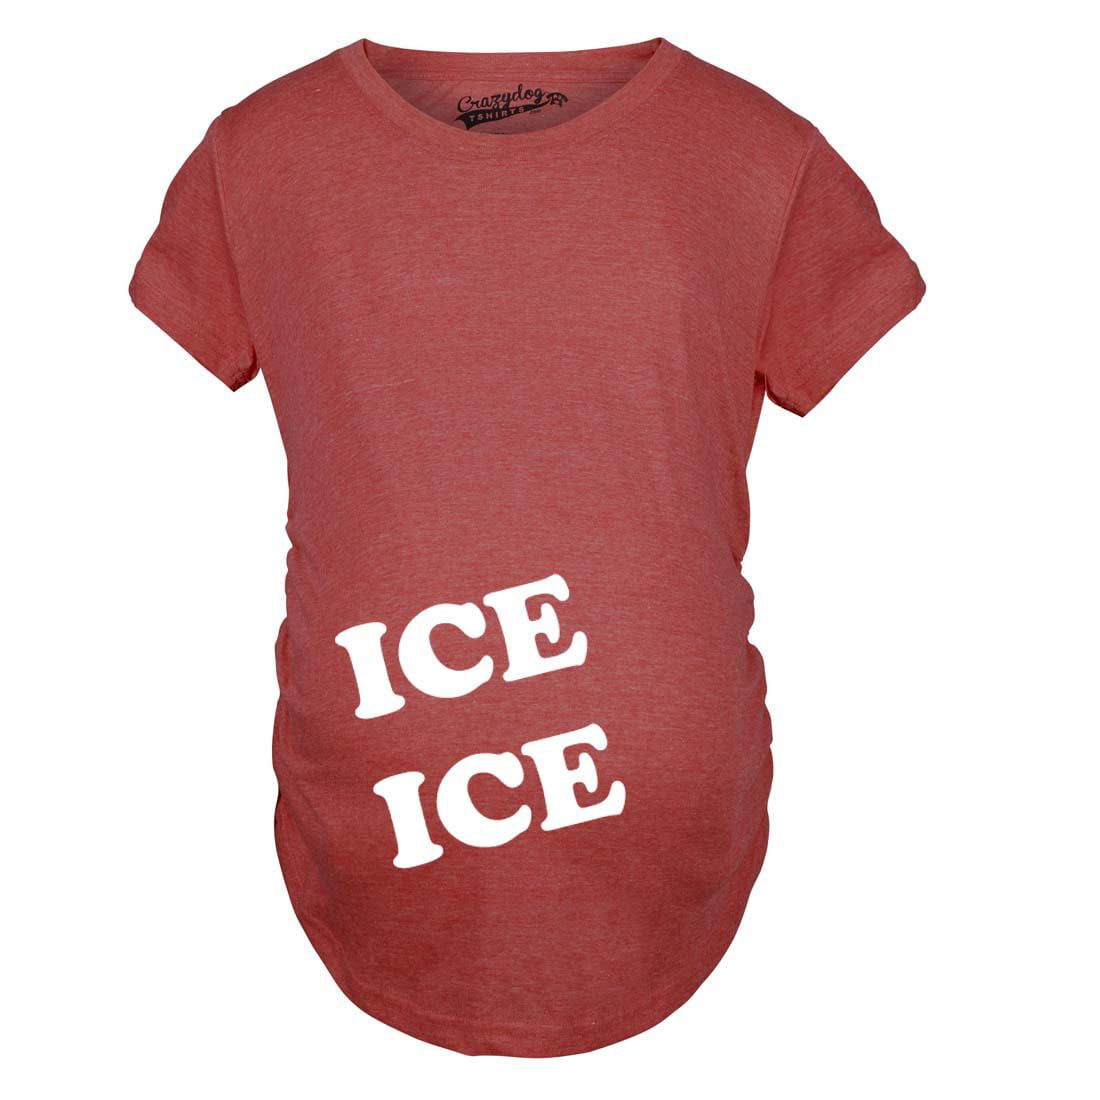 Maternity Ice Ice Pregnant Tee Novelty Baby Bump Pregnancy Announcement T Shirt